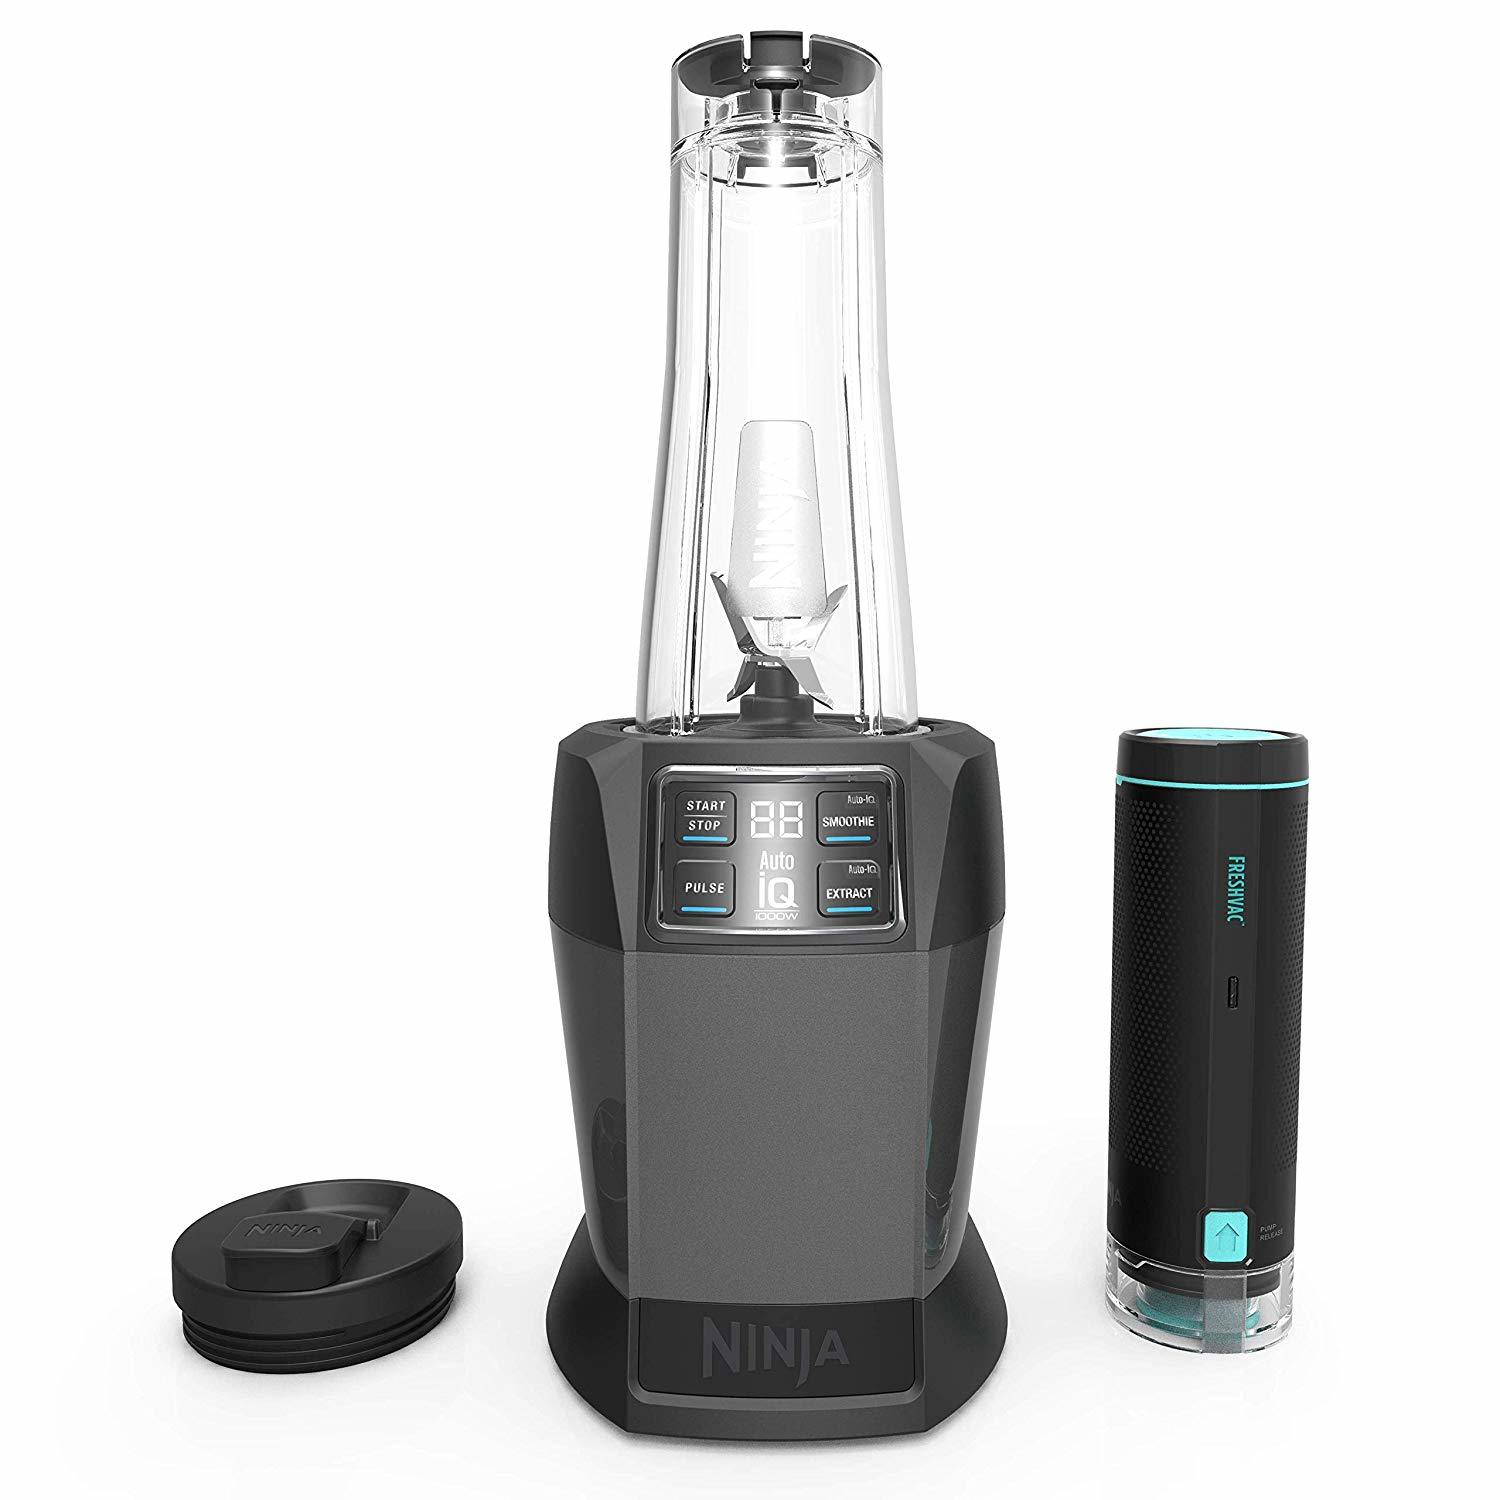 Nutri Ninja Blender With FreshVac Technology For $59.95 Shipped From Amazon After $40 Cyber Monday Savings!